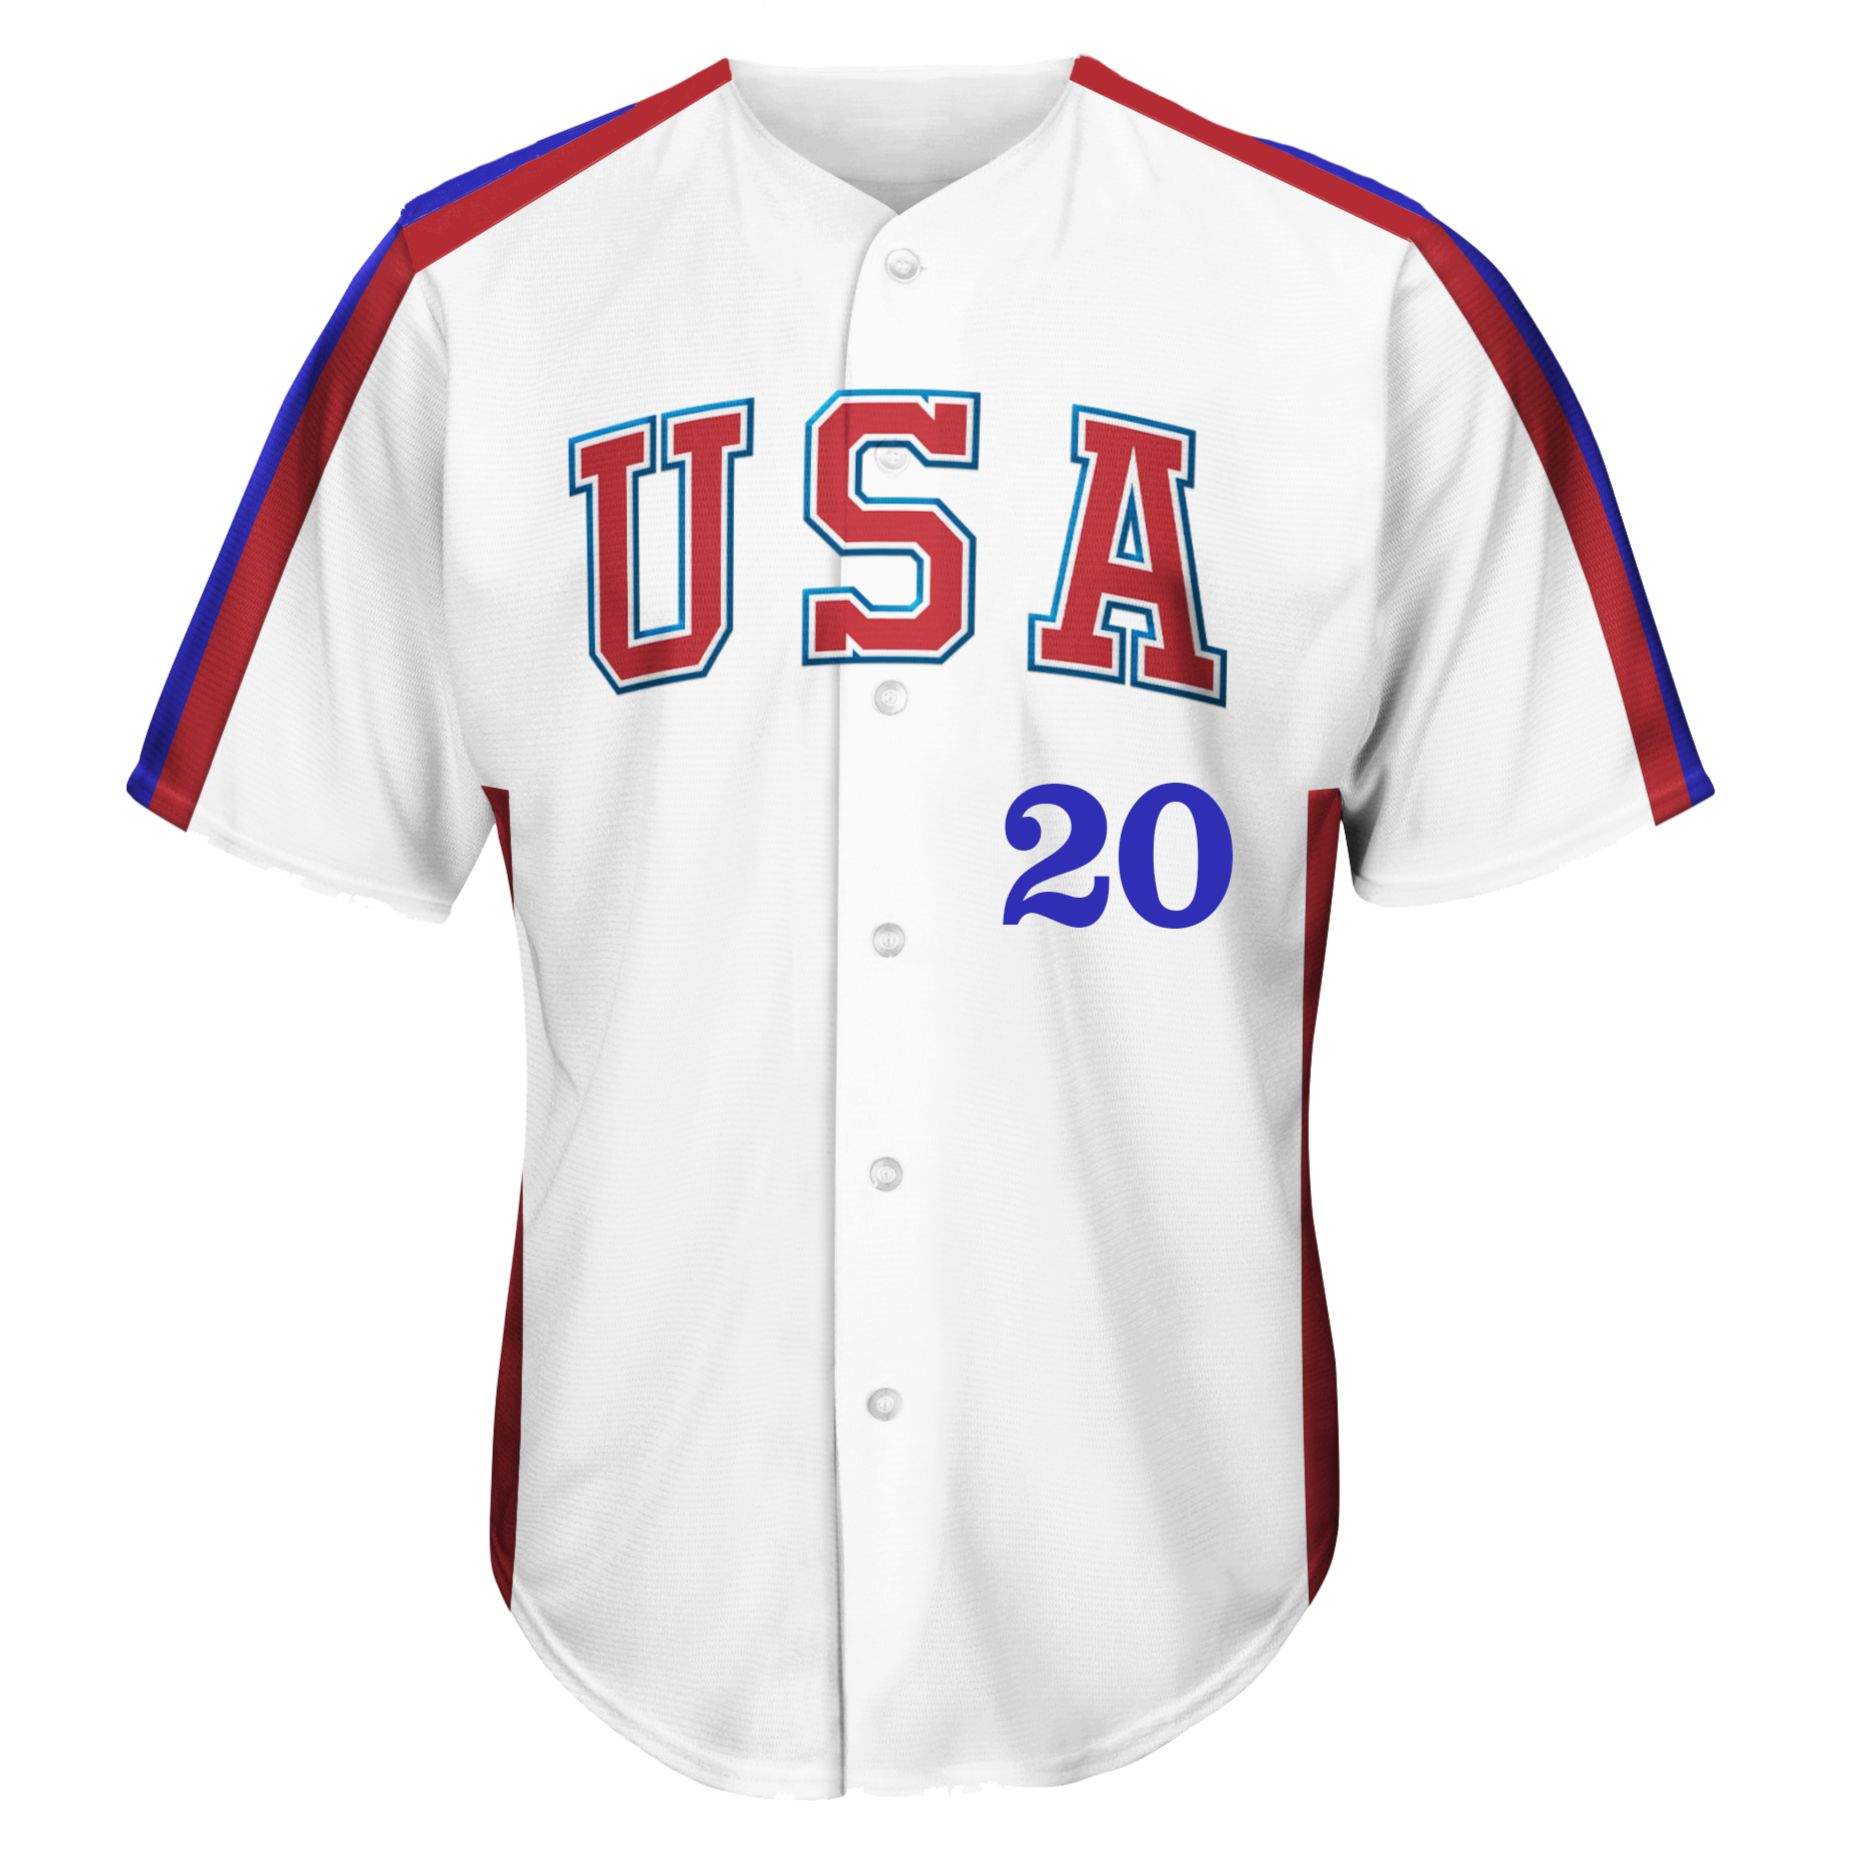  USA Red Baseball Jersey Stitched America Shirts Sports Uniform  #1 Gift for Men and Women Small : Clothing, Shoes & Jewelry